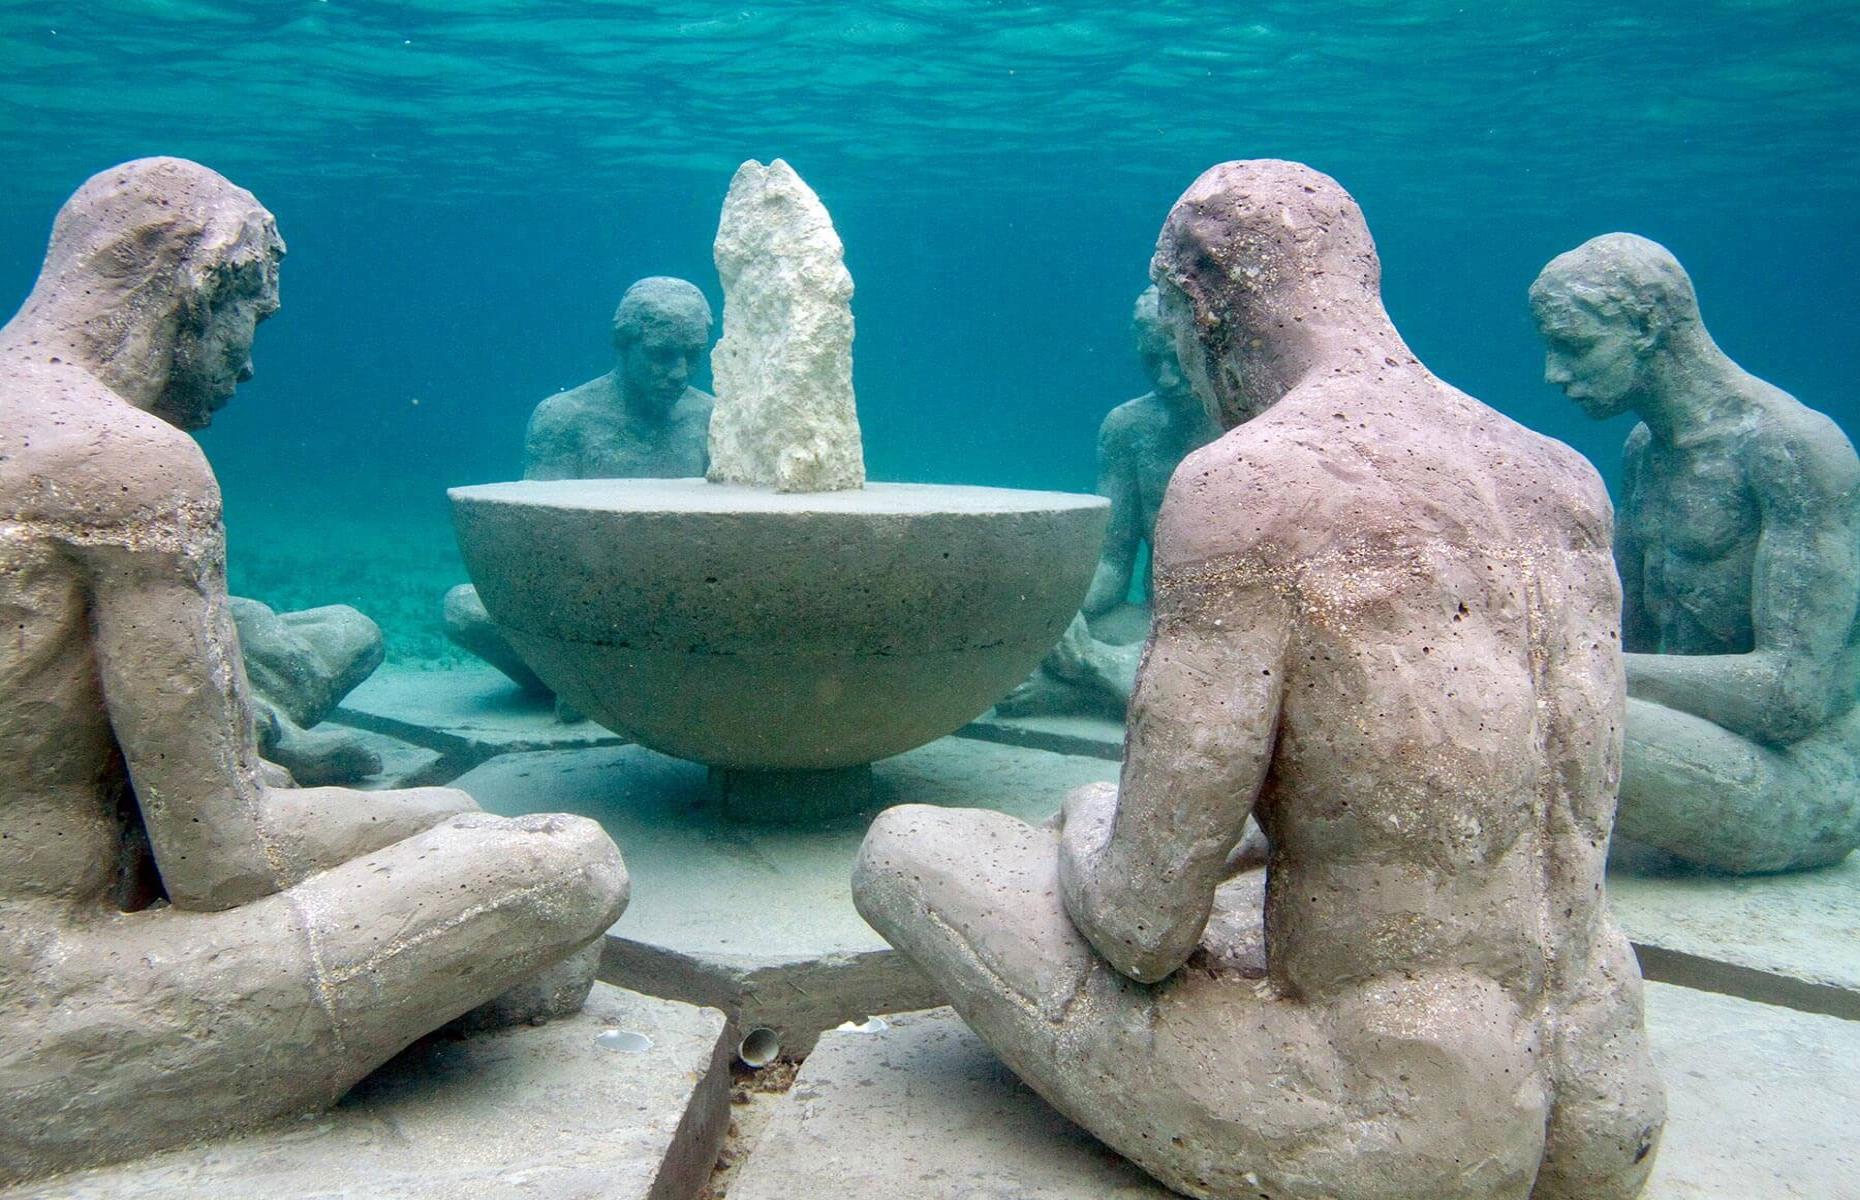 Head to Cancun Underwater Museum to see around 500 sculptures, mostly created by British artist Jason Taylor, underneath the ocean. Located off the coast of Isla Mujeres, the museum is a non-profit organization created to draw people away from the natural corals and give marine life a chance to regenerate and breed. Most of the artwork, which is submerged up to 18 feet (5.5m) below the surface, has become covered with algae and polyps, making the area the largest artificial reef in the world.